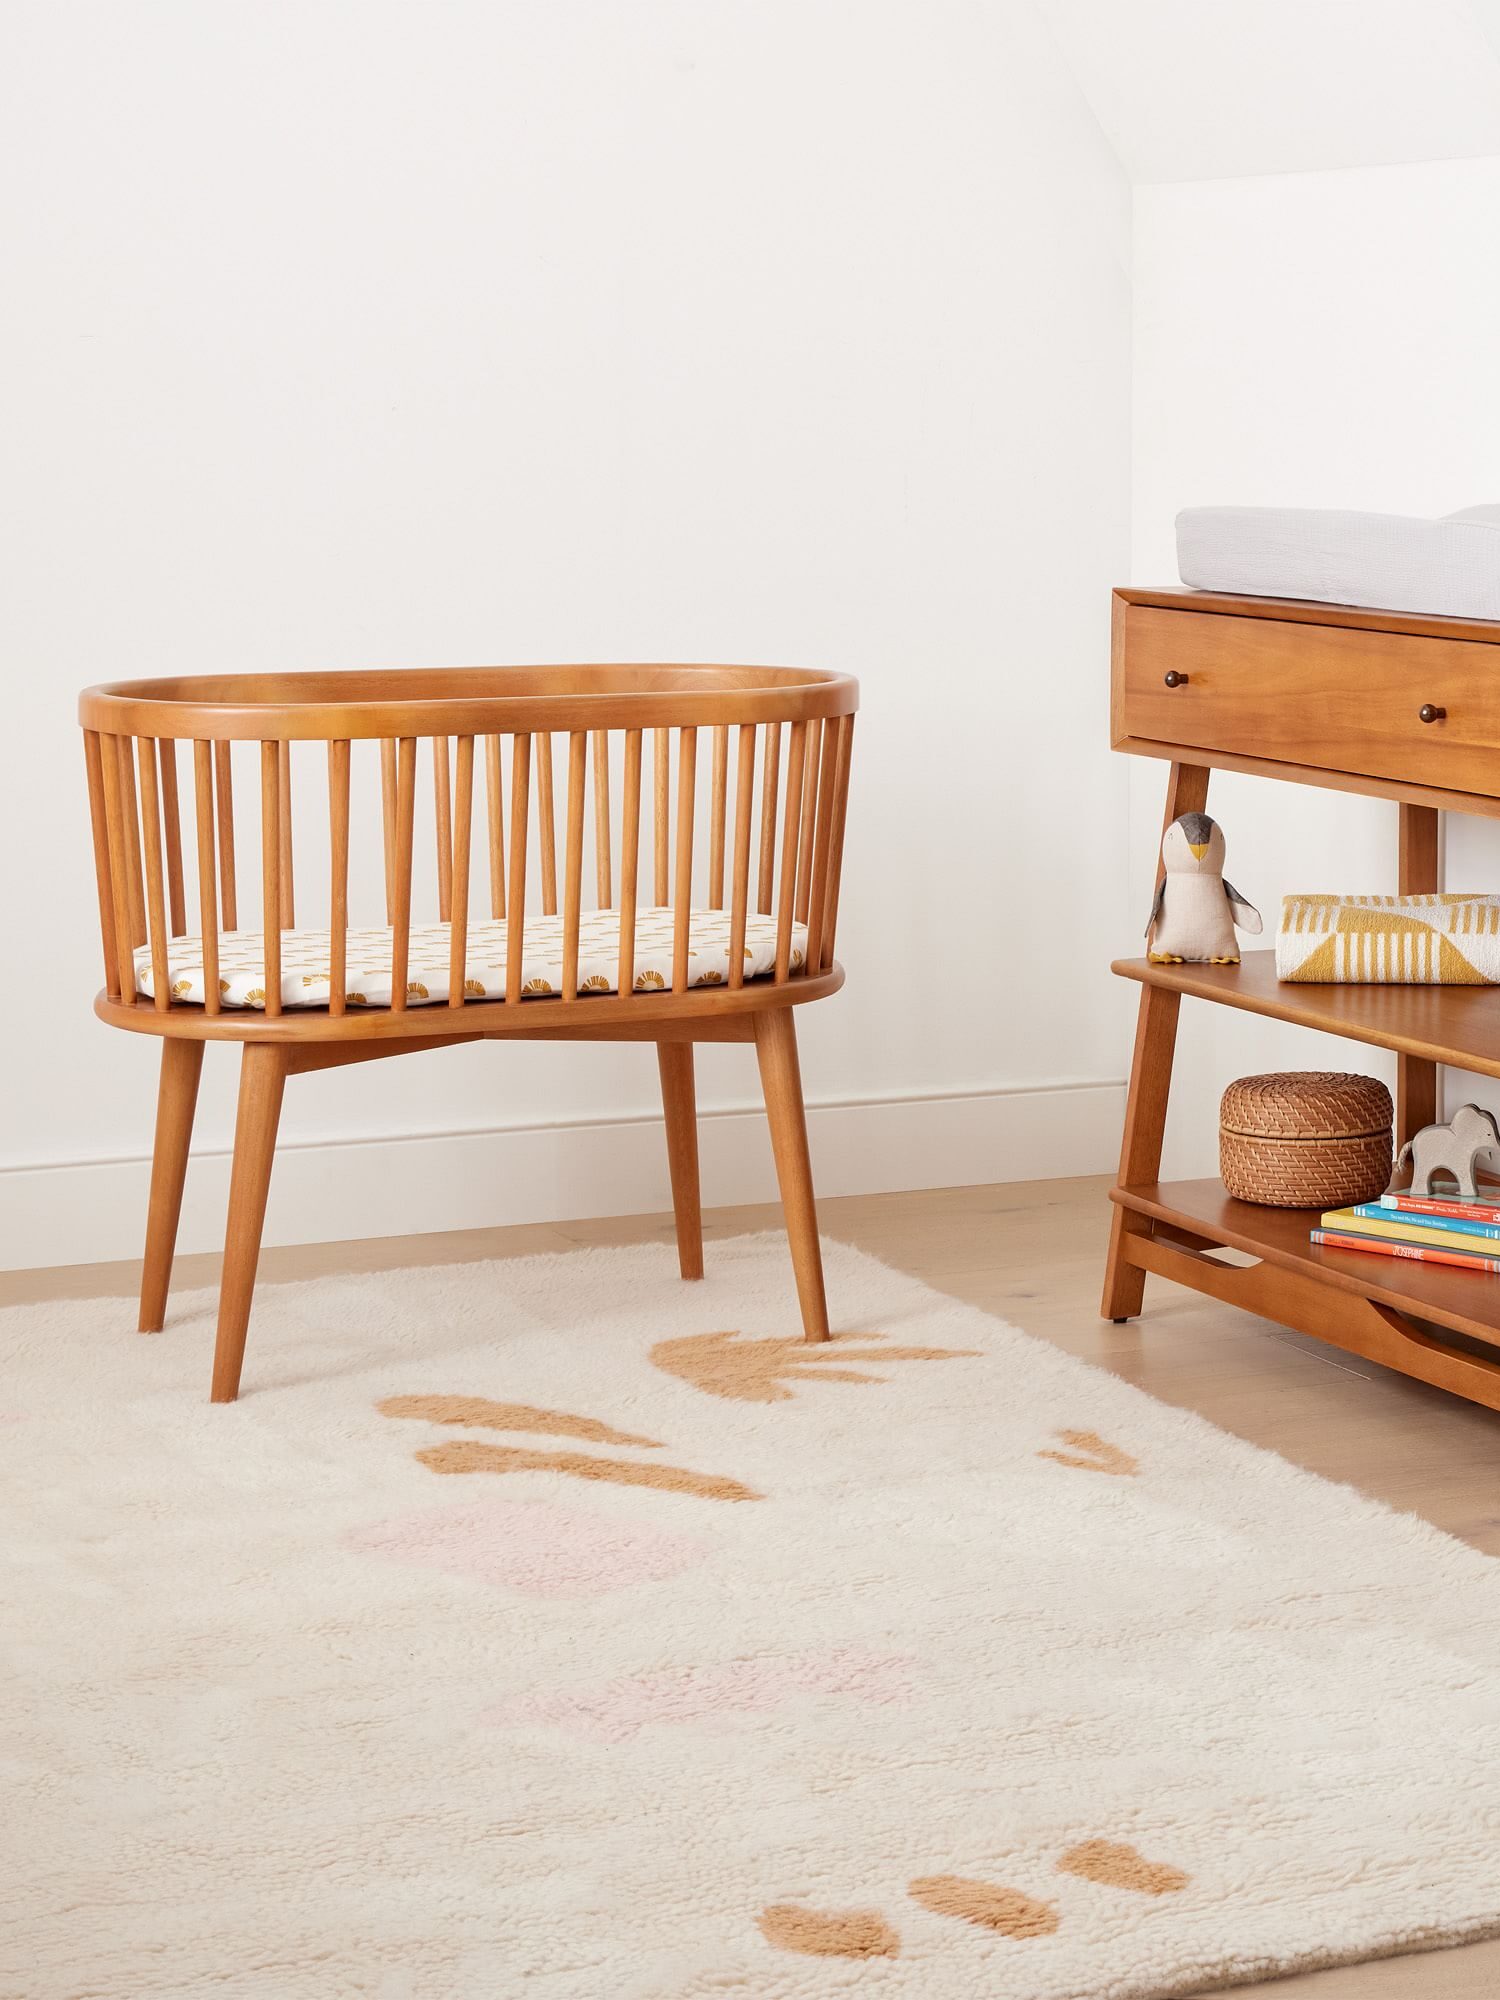 A warm wood bassinet in a bedroom